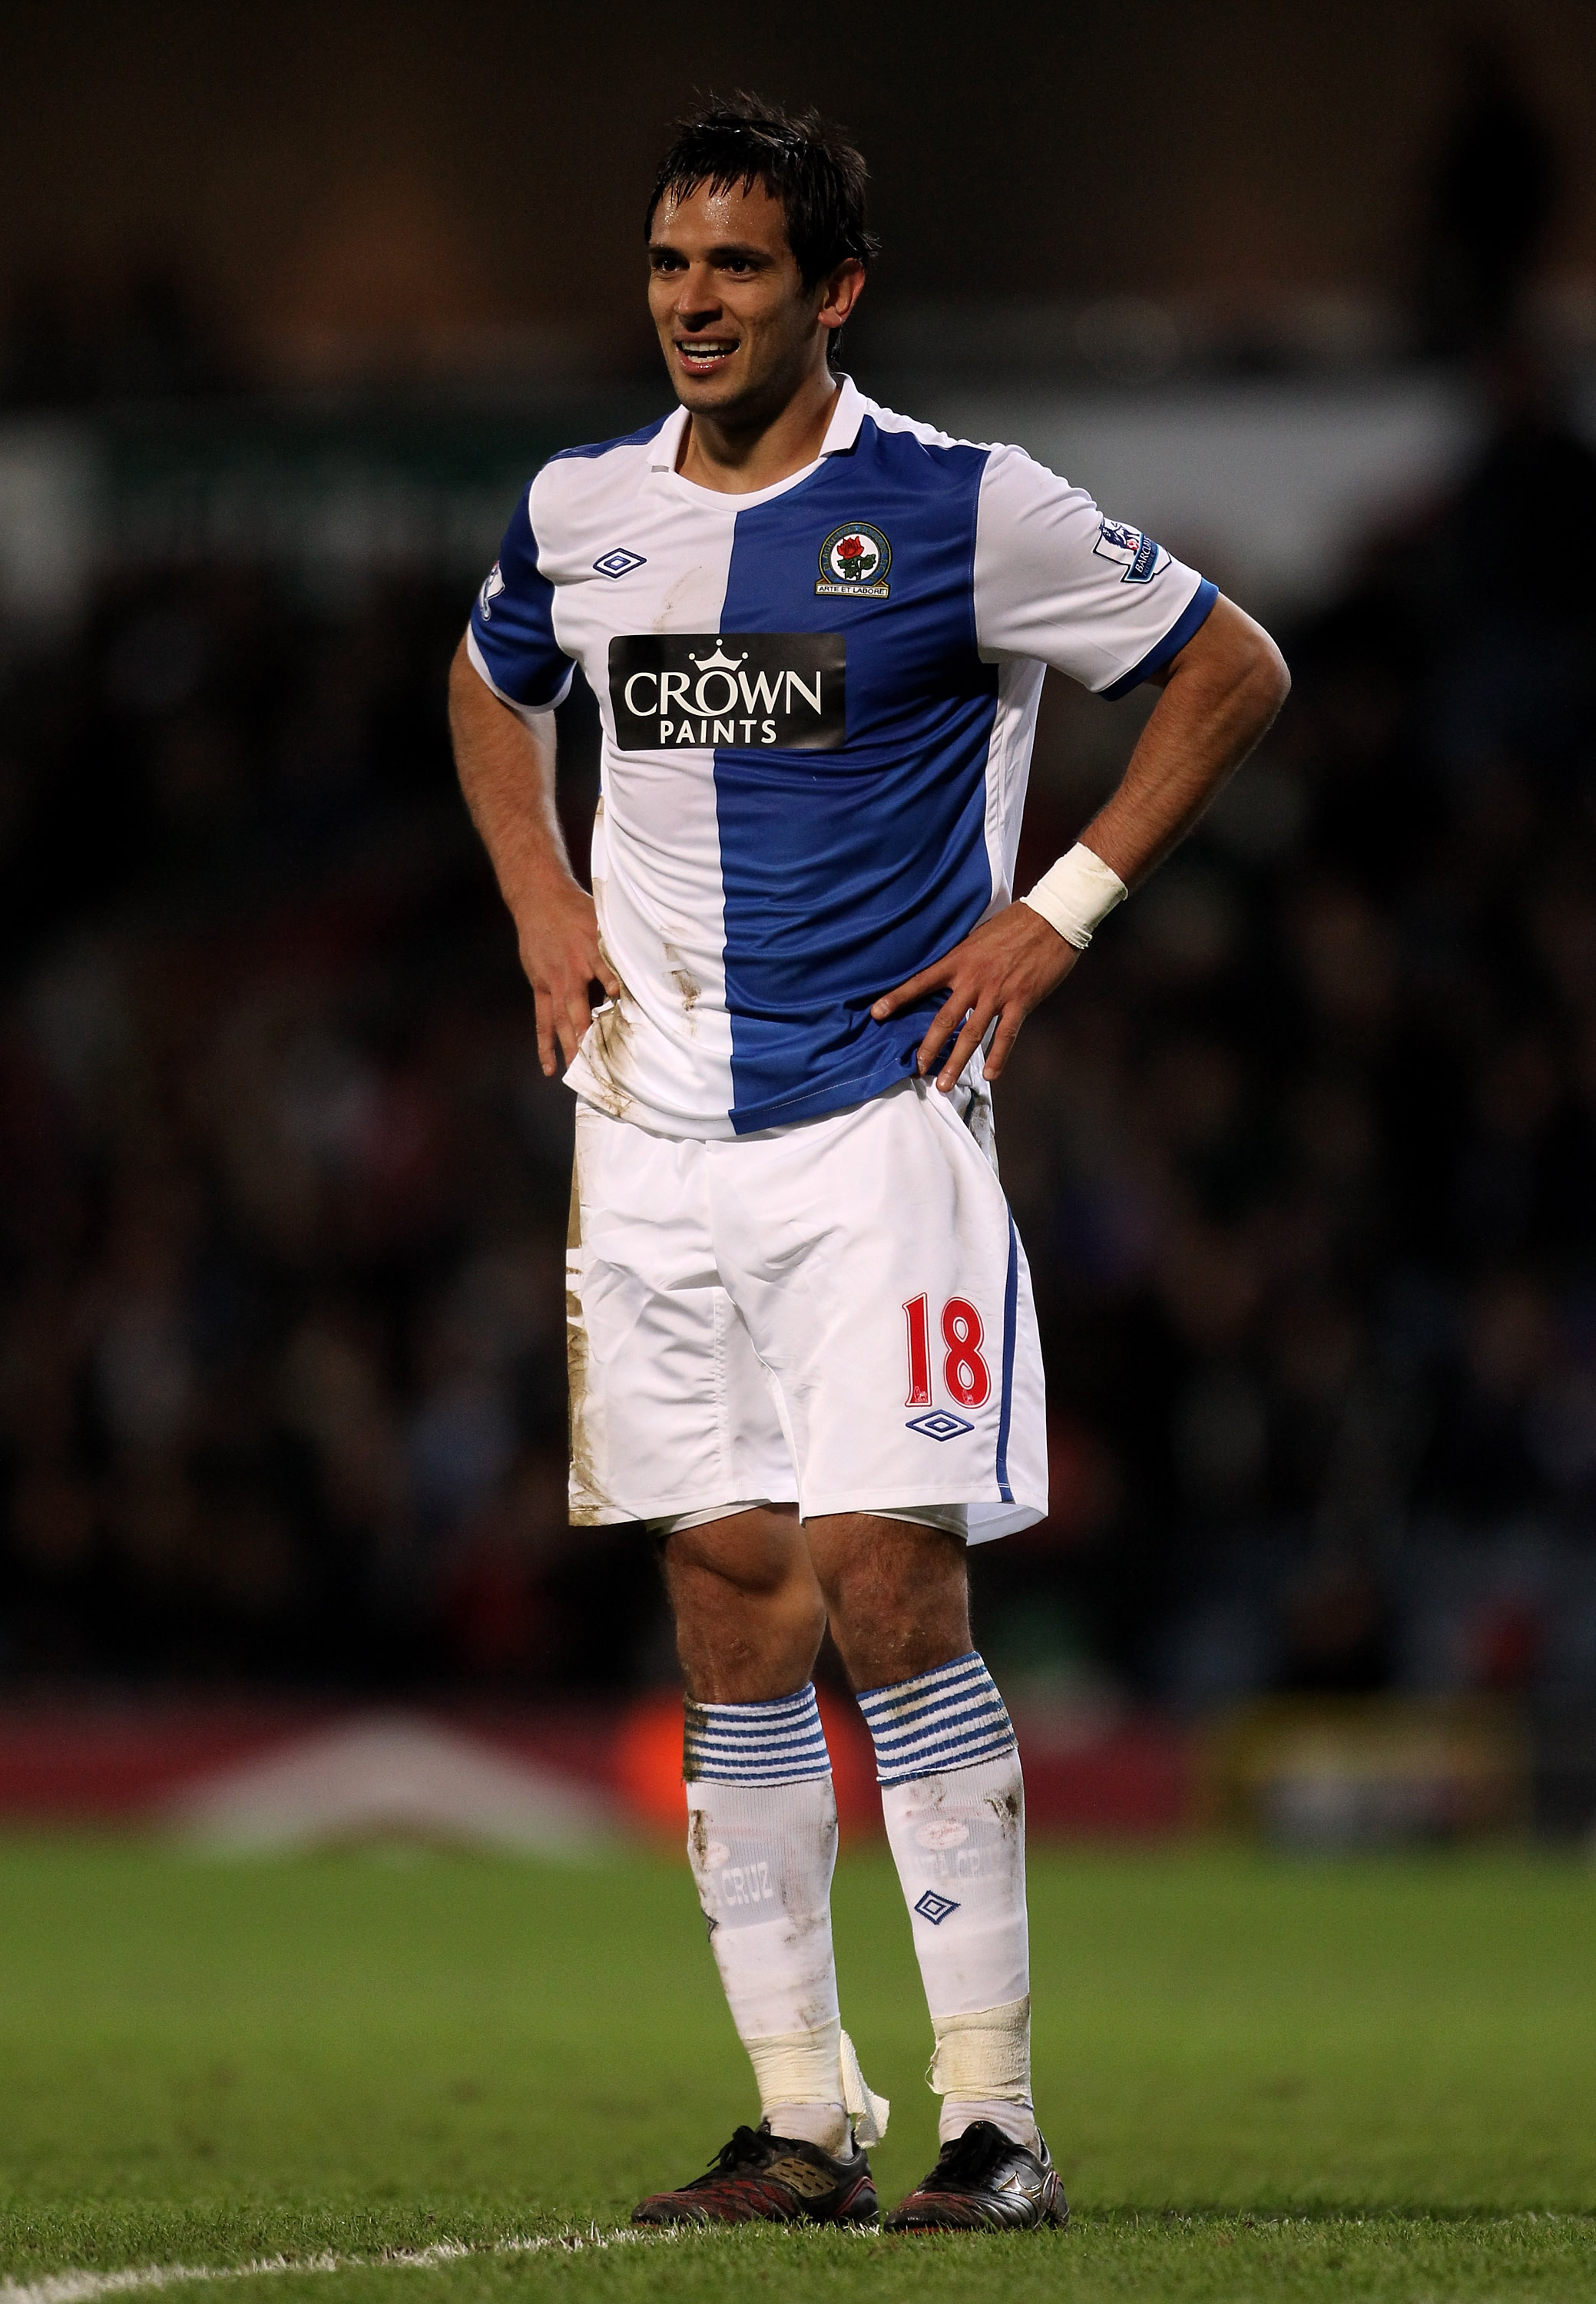 BLACKBURN, ENGLAND - JANUARY 23:  Roque Santa Cruz of Blackburn Rovers looks on during the Barclays Premier League match between Blackburn Rovers and West Bromwich Albion at Ewood Park on January 23, 2011 in Blackburn, England.  (Photo by Alex Livesey/Get